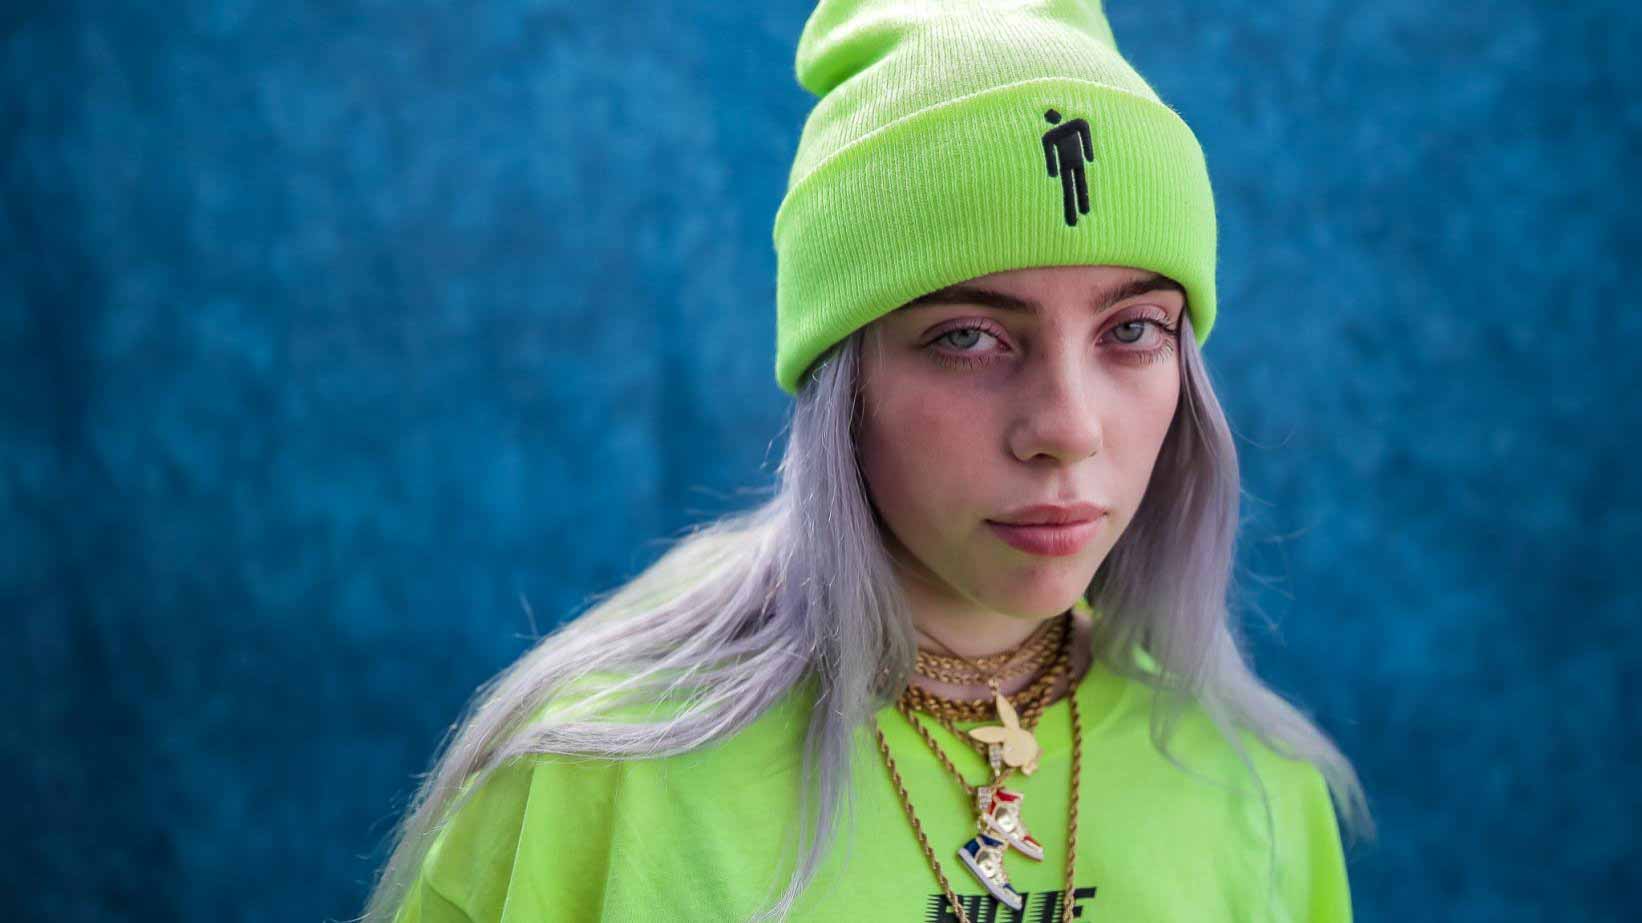 Billie Eilish Pirate Baird O'Connell[2] (born December 18, 2001[3]) is an American singer and songwriter. Her debut single, 